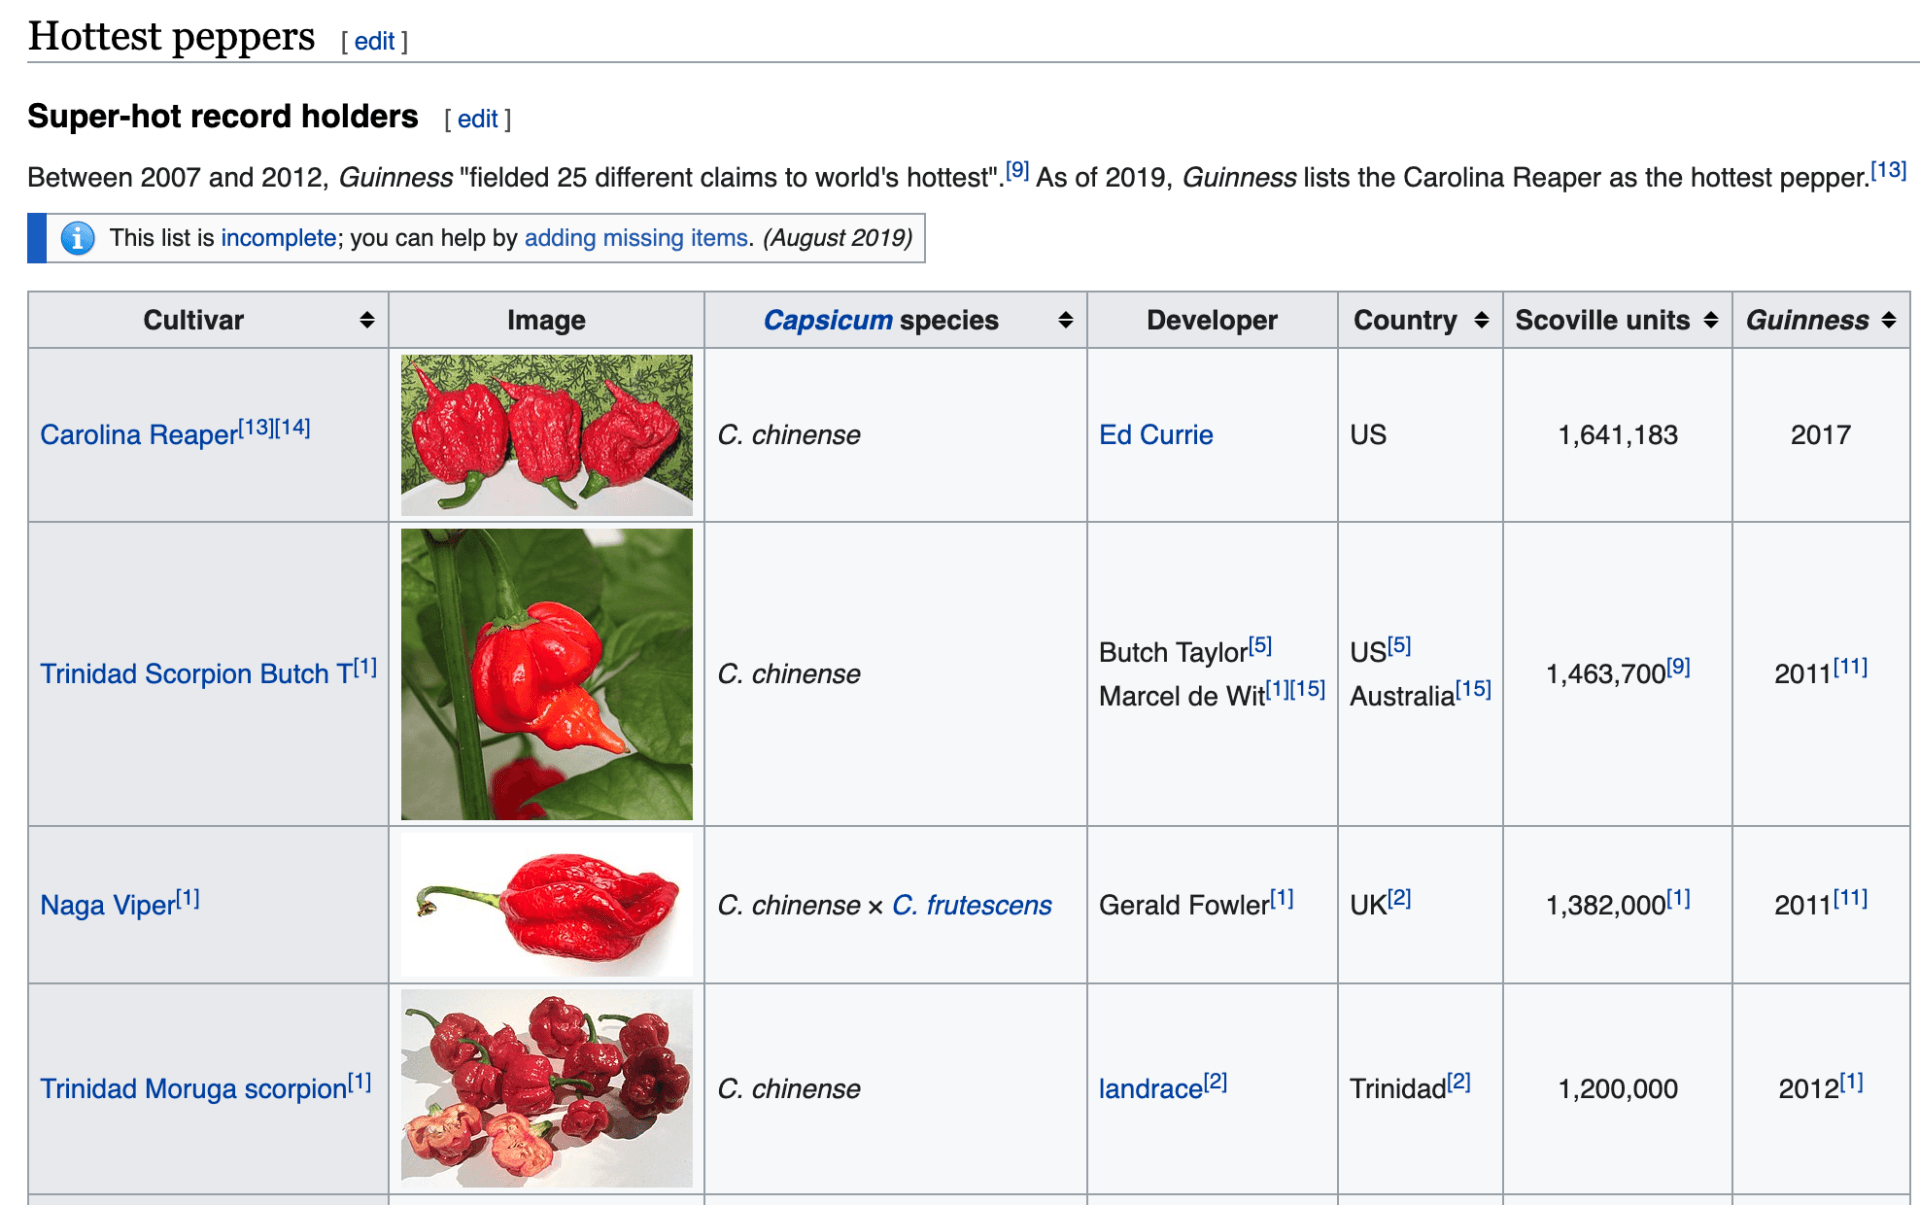 Table of hottest peppers on wikipedia